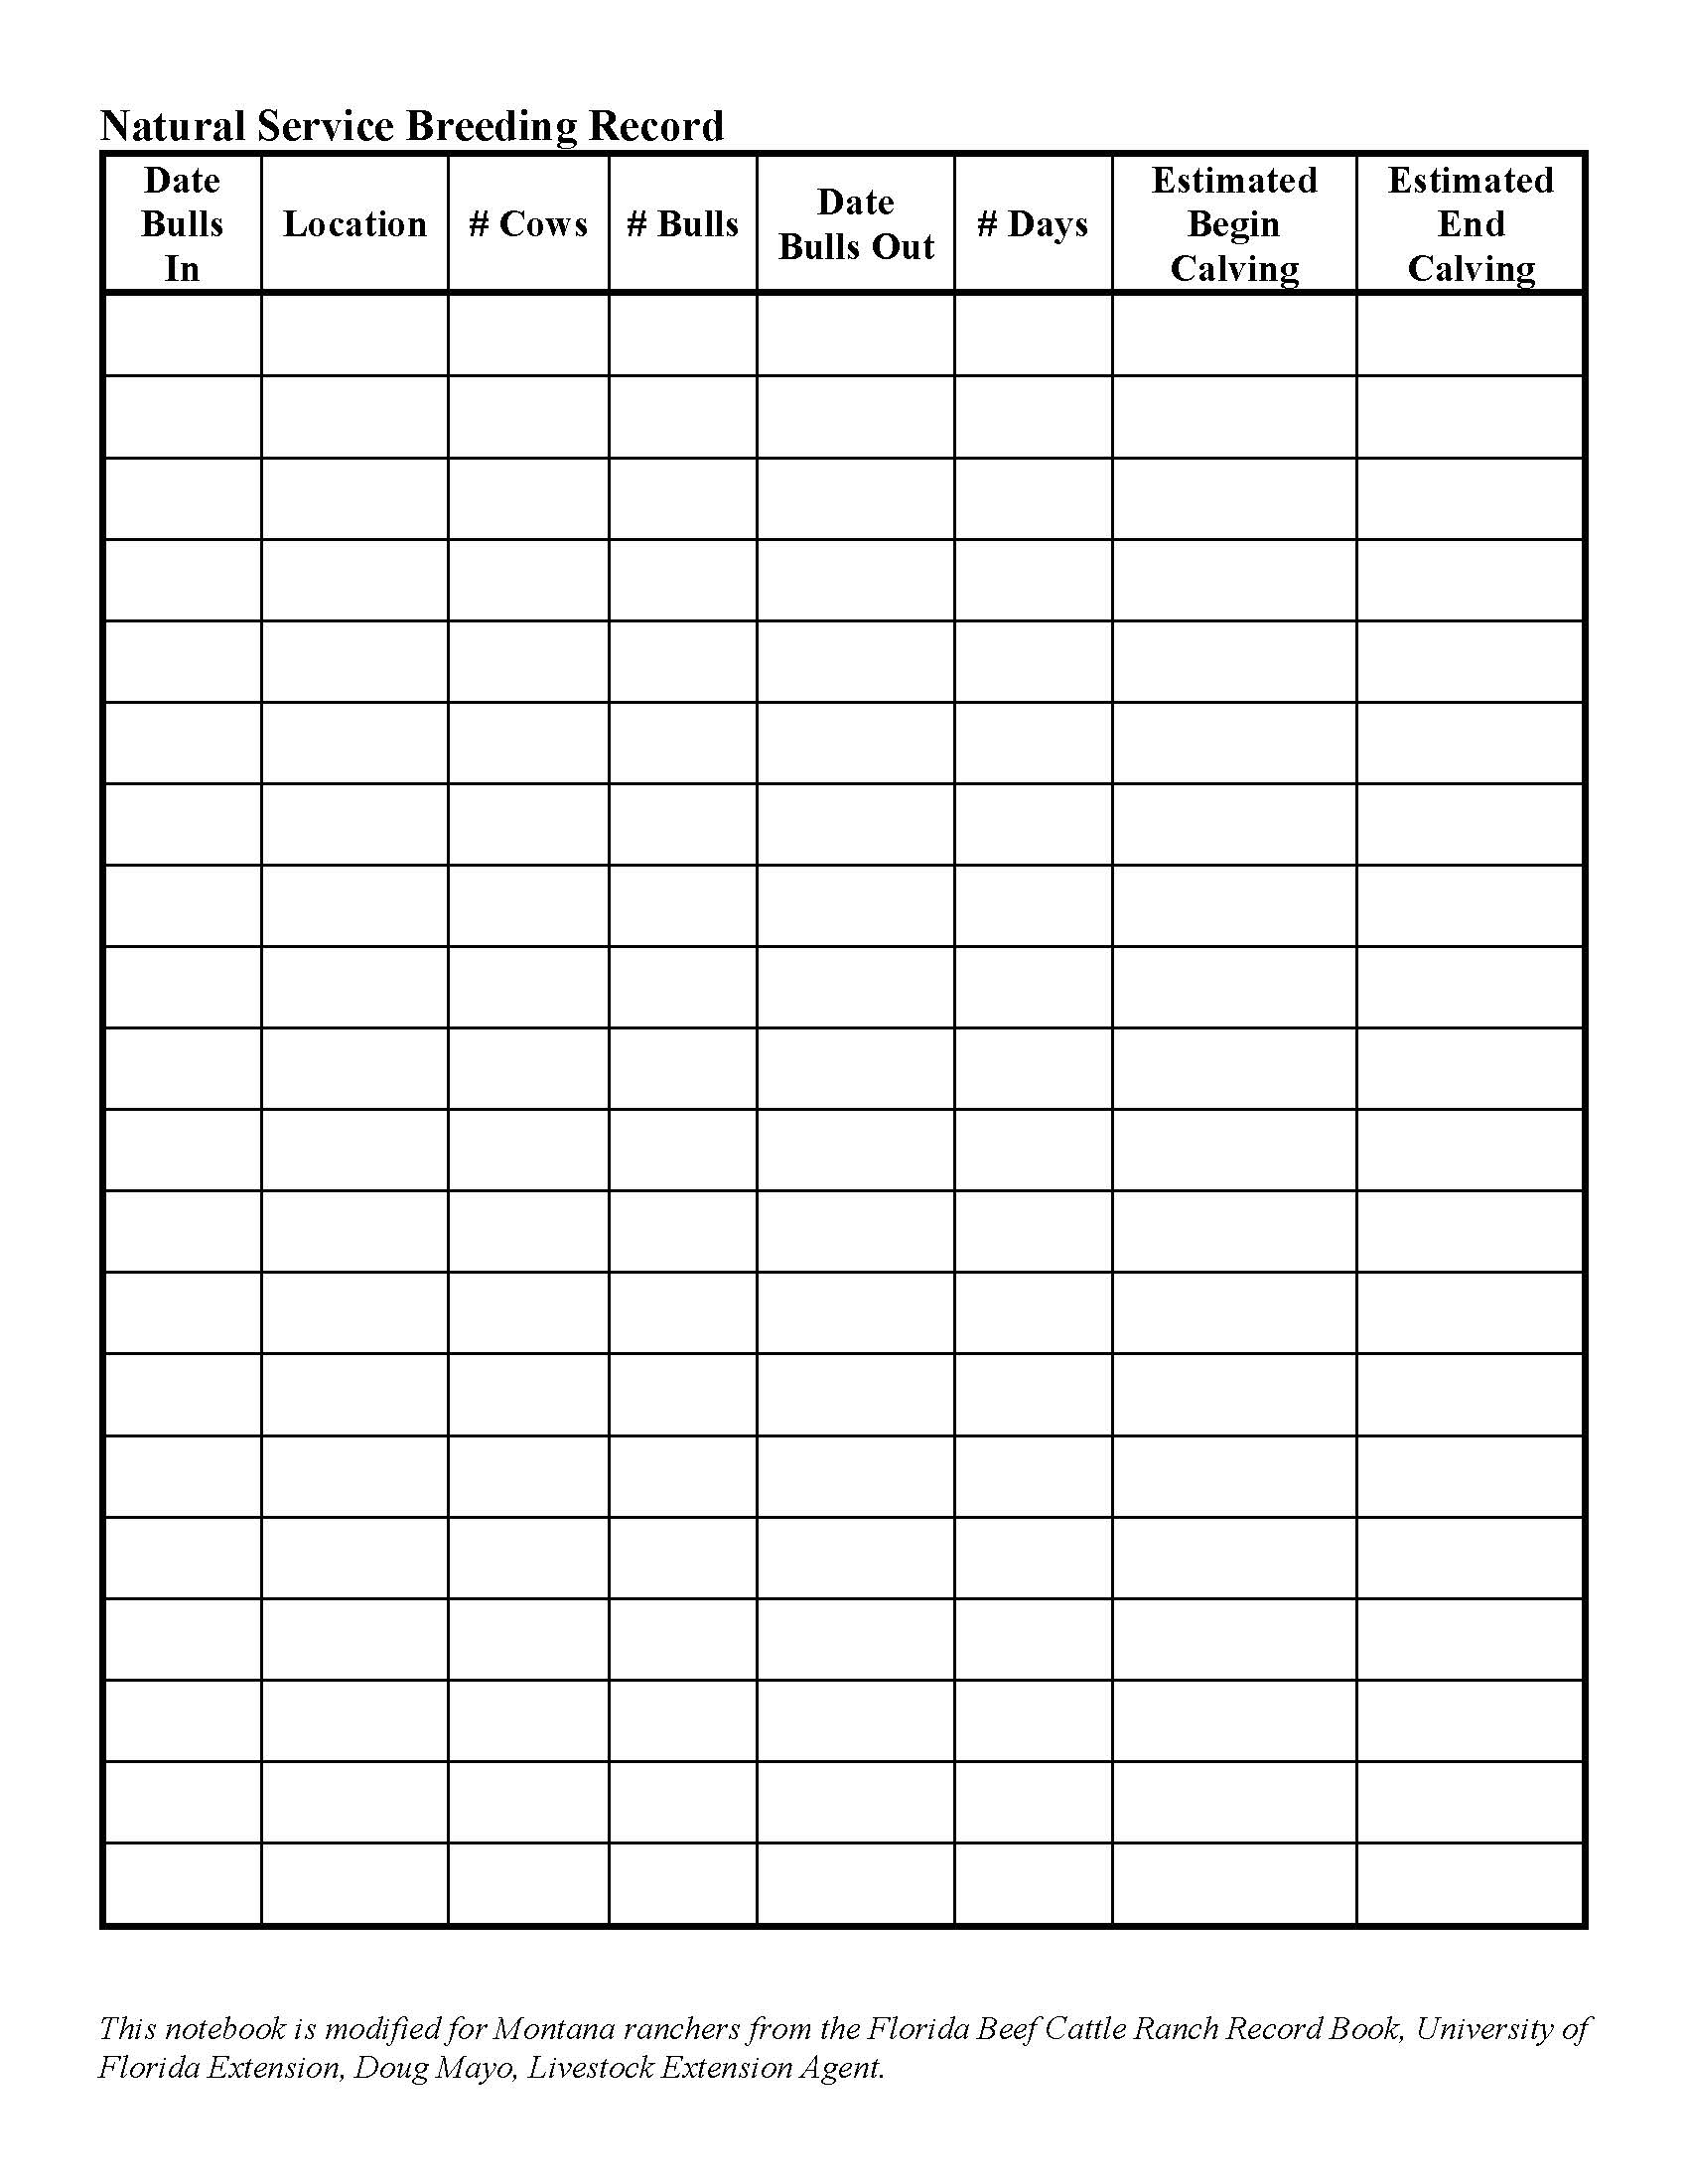 A sample table used for keeping records on natural service breeding. Used in the rancher notebook.